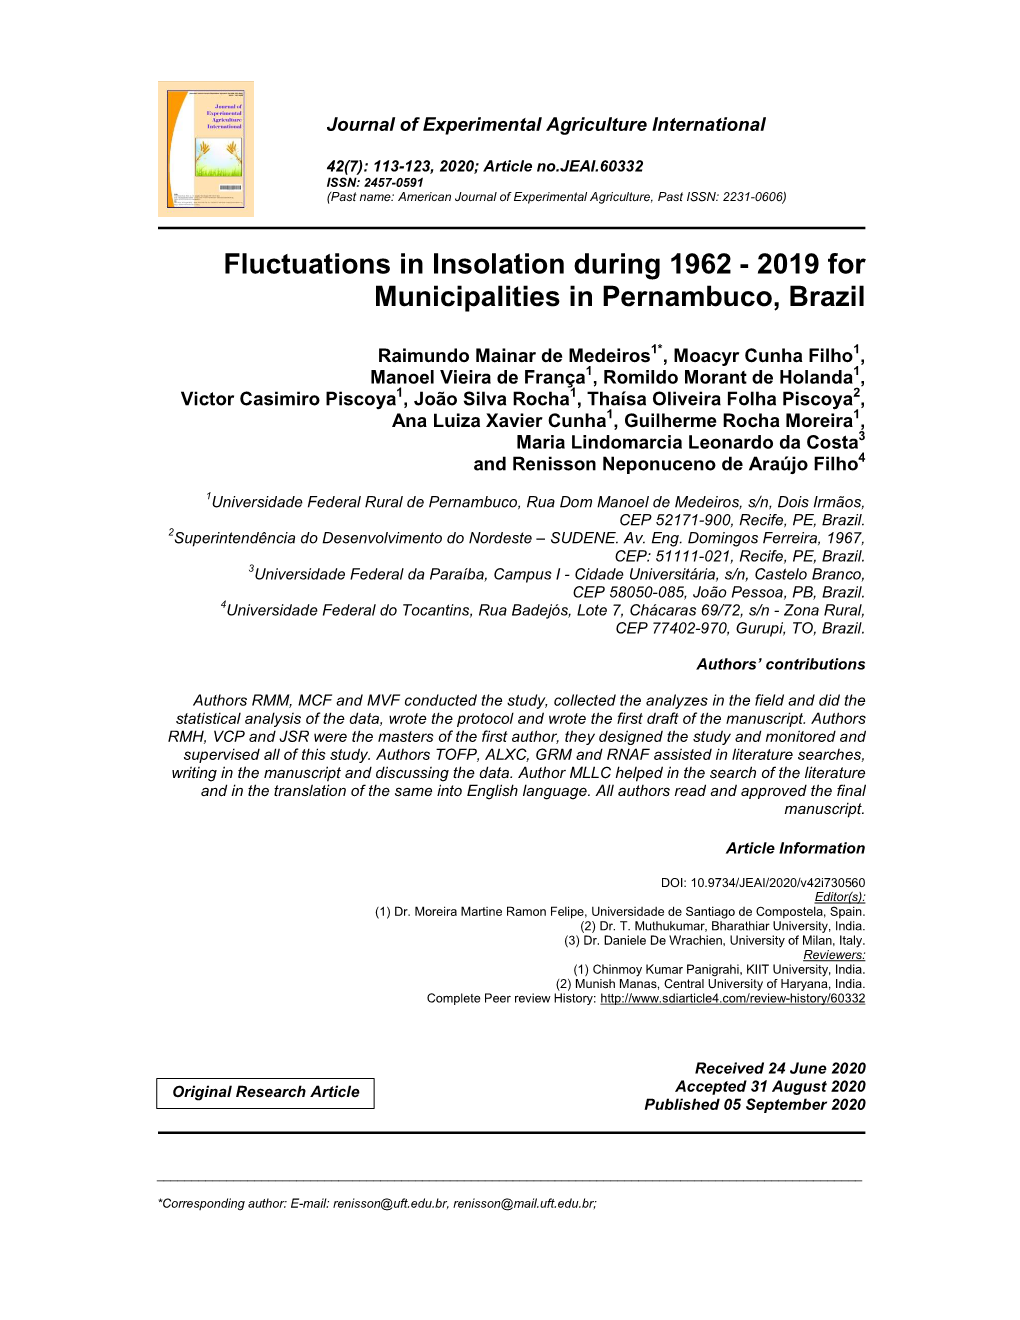 Fluctuations in Insolation During 1962 - 2019 for Municipalities in Pernambuco, Brazil